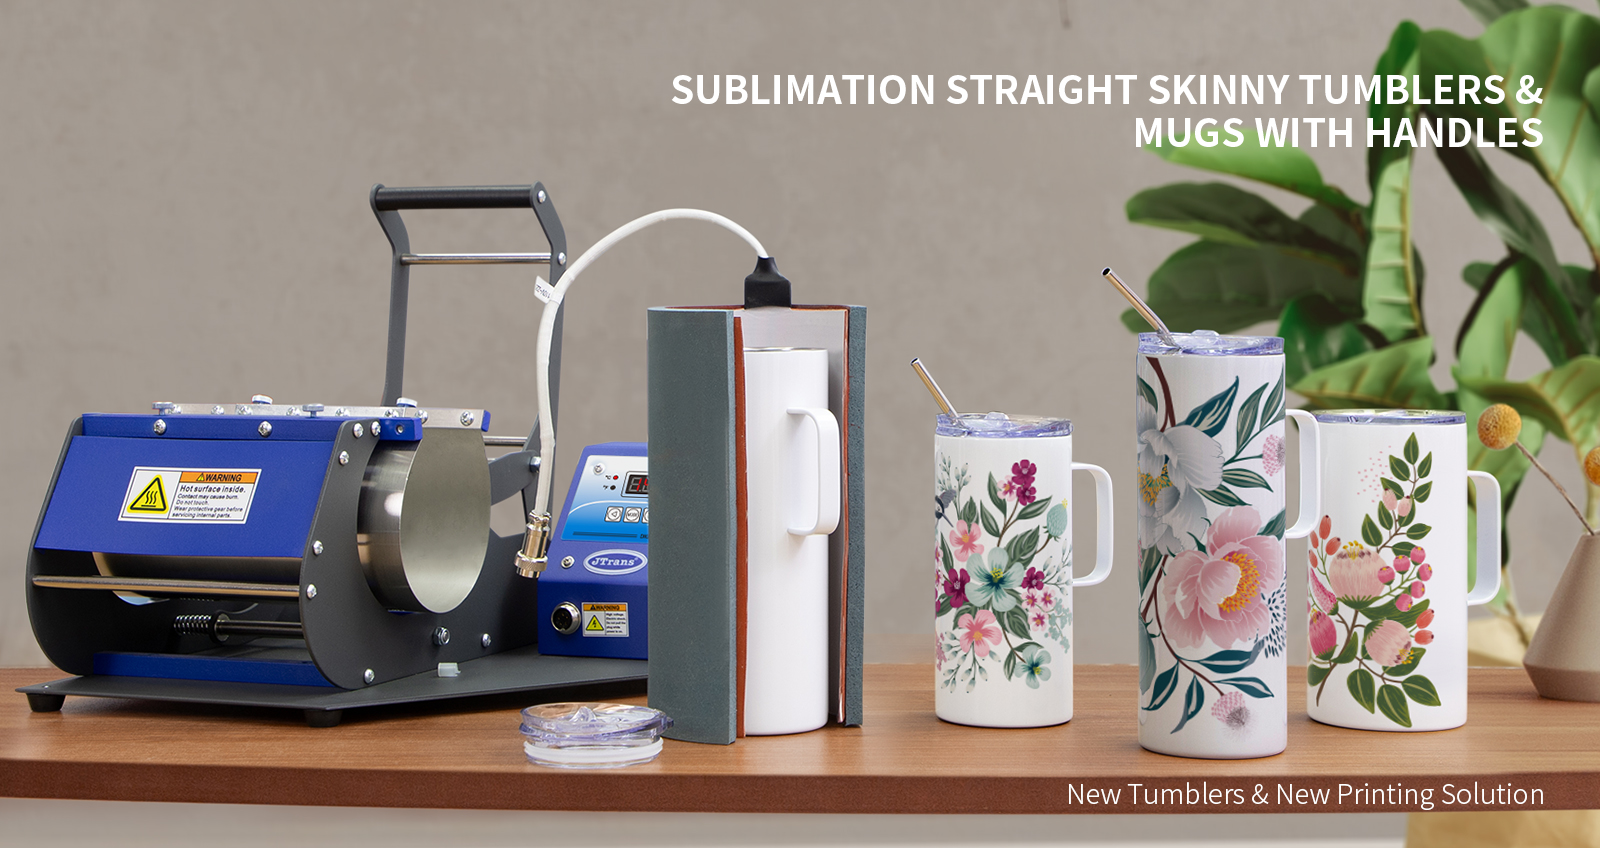 20210113_Sublimation_Skinny_Tumblers__Mugs_with_Handles_1600x848